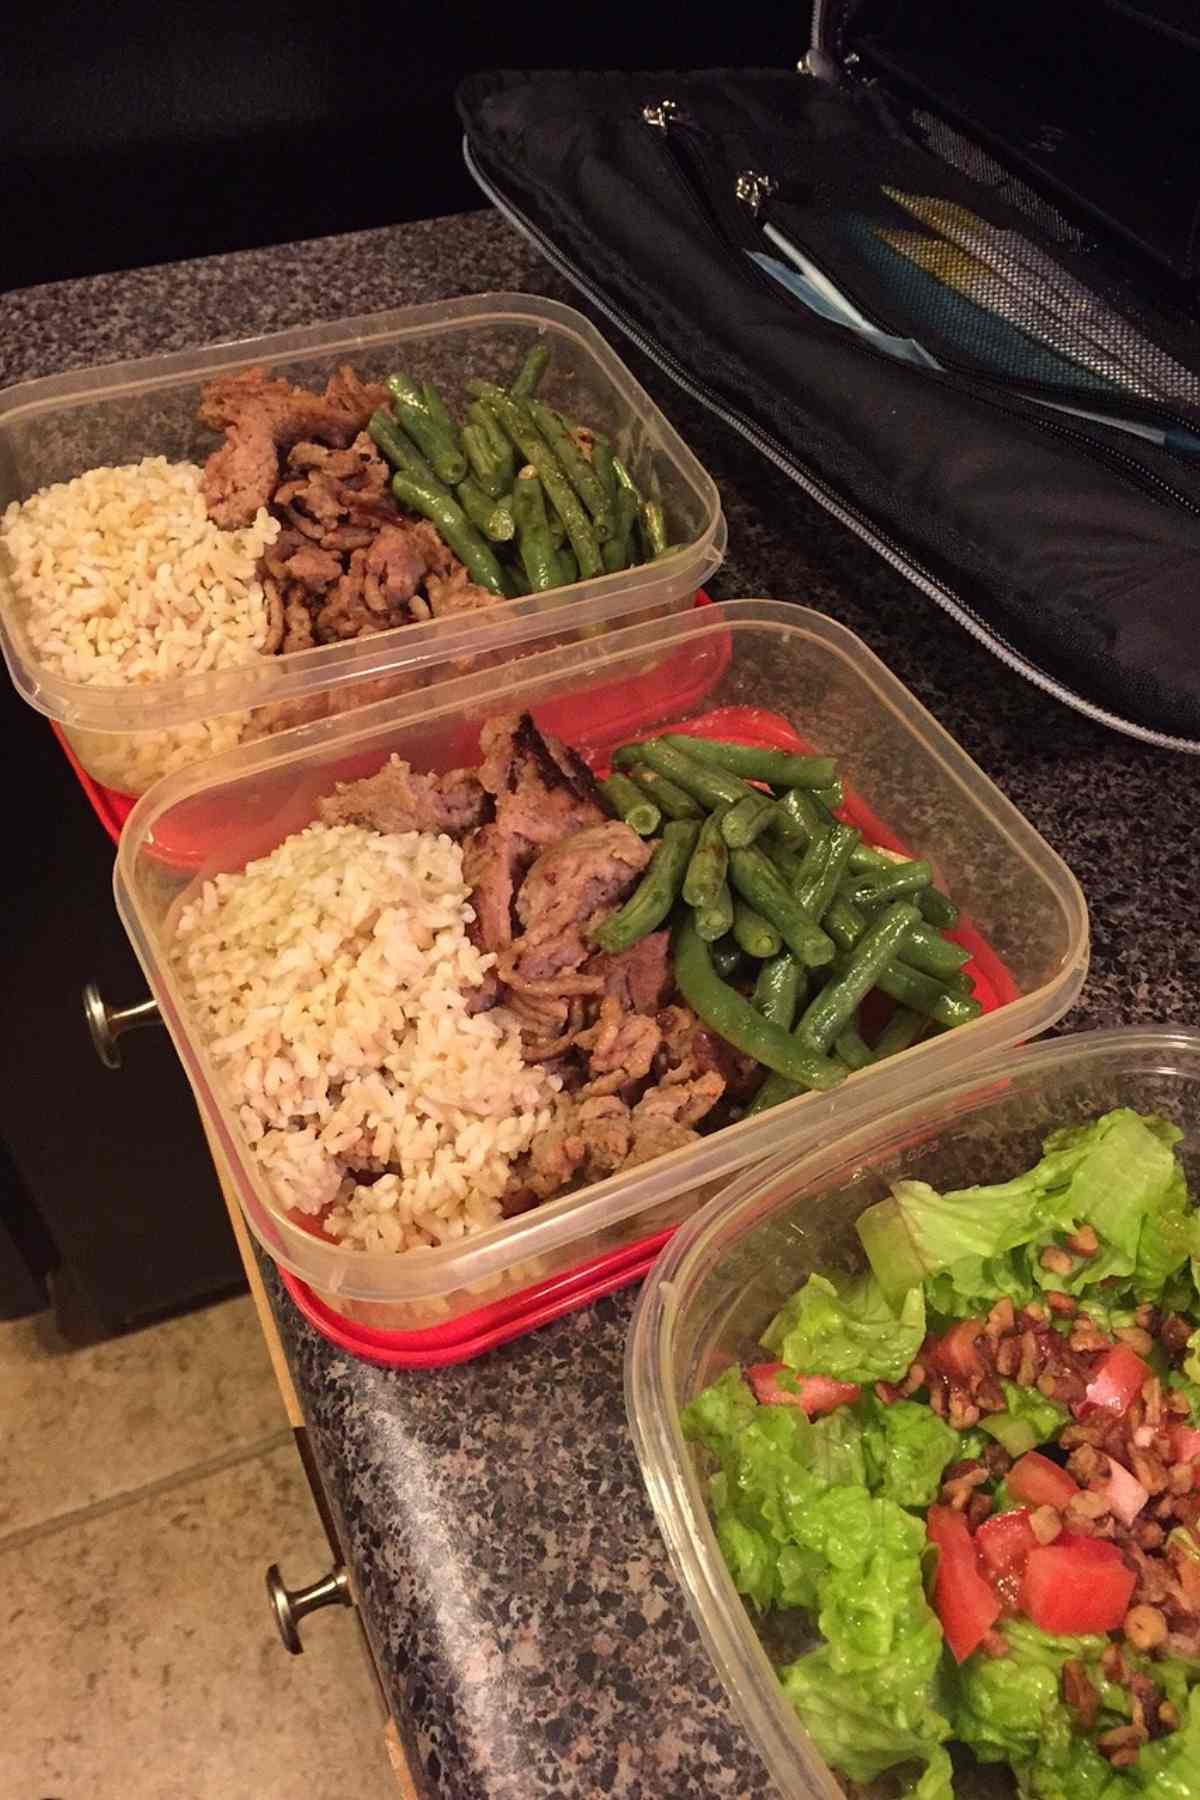 post workout meal of rice, protein and vegetables in plastic container